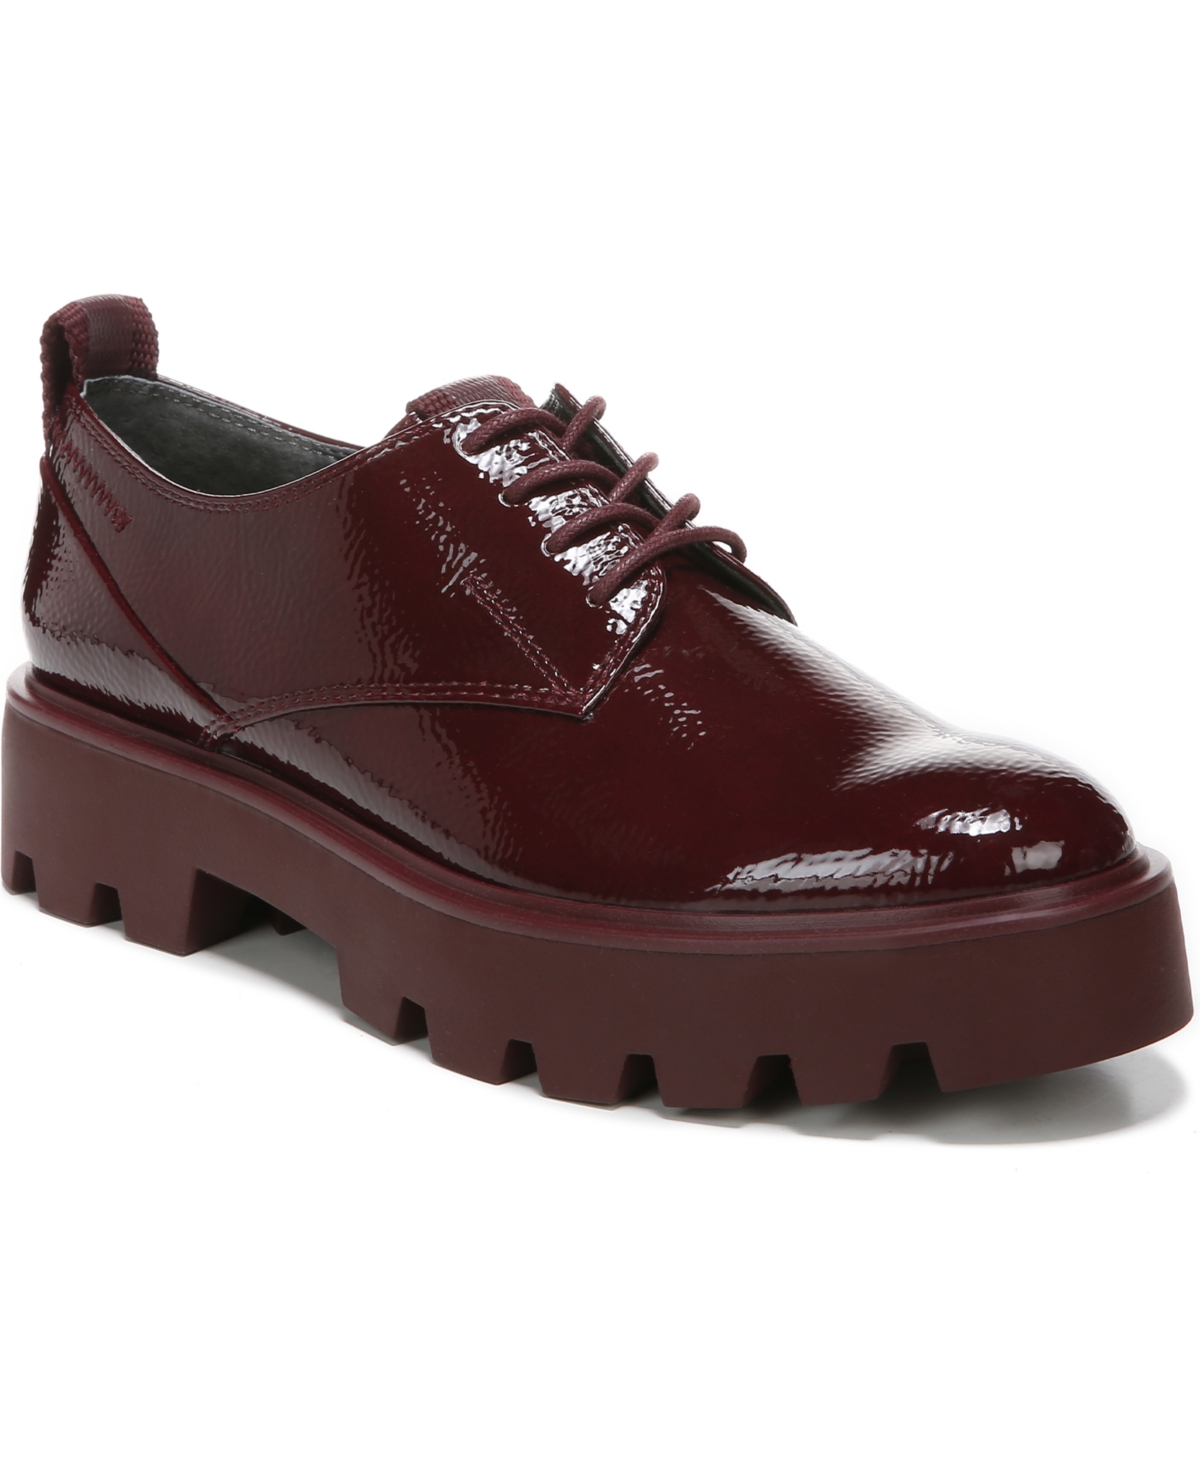 UPC 017138587655 product image for Franco Sarto Balin-Laced Lug Sole Oxfords Women's Shoes | upcitemdb.com